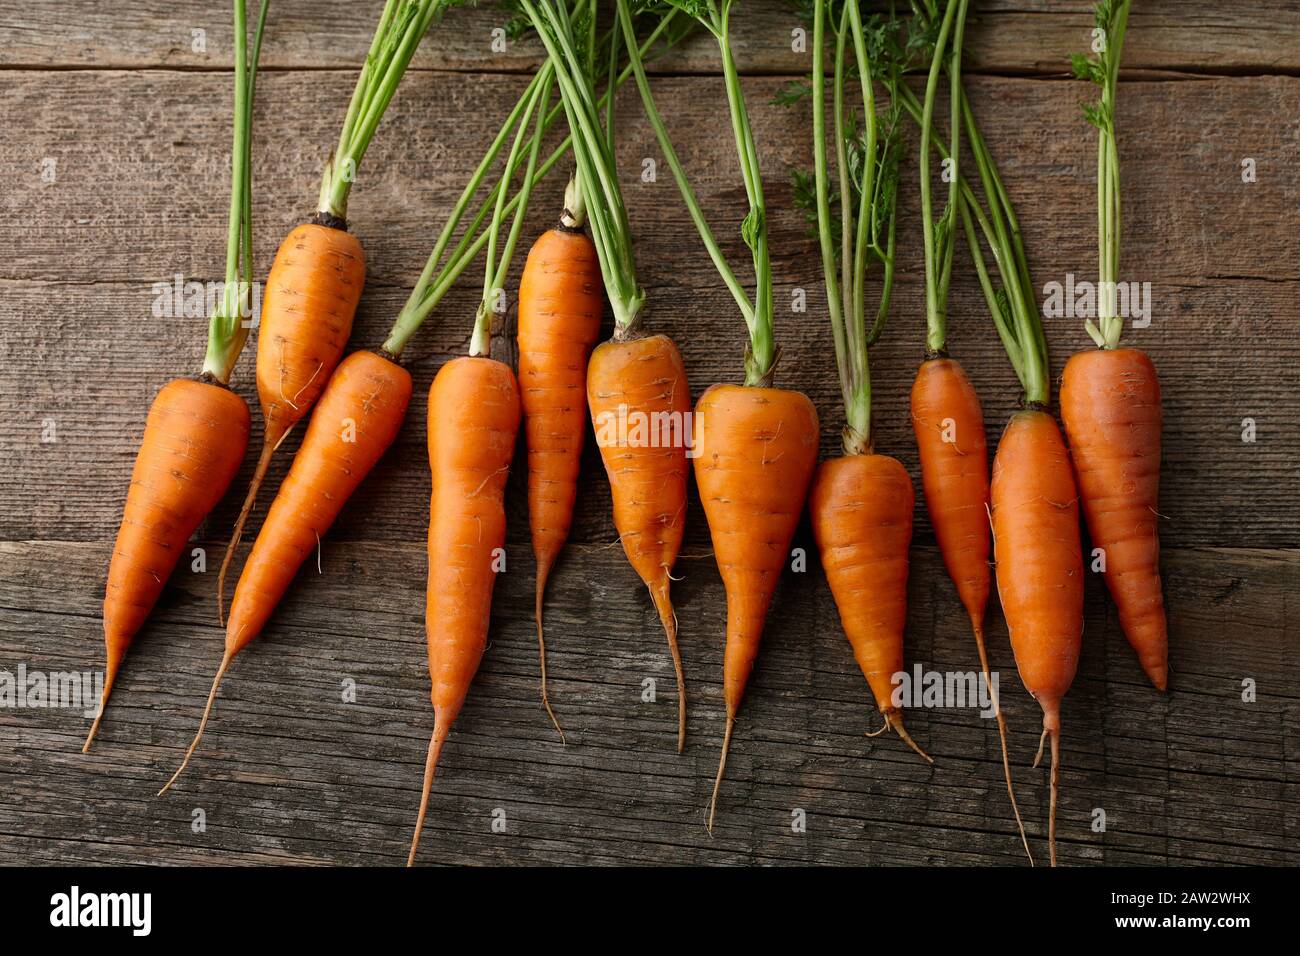 Fresh carrots with greens close up Stock Photo